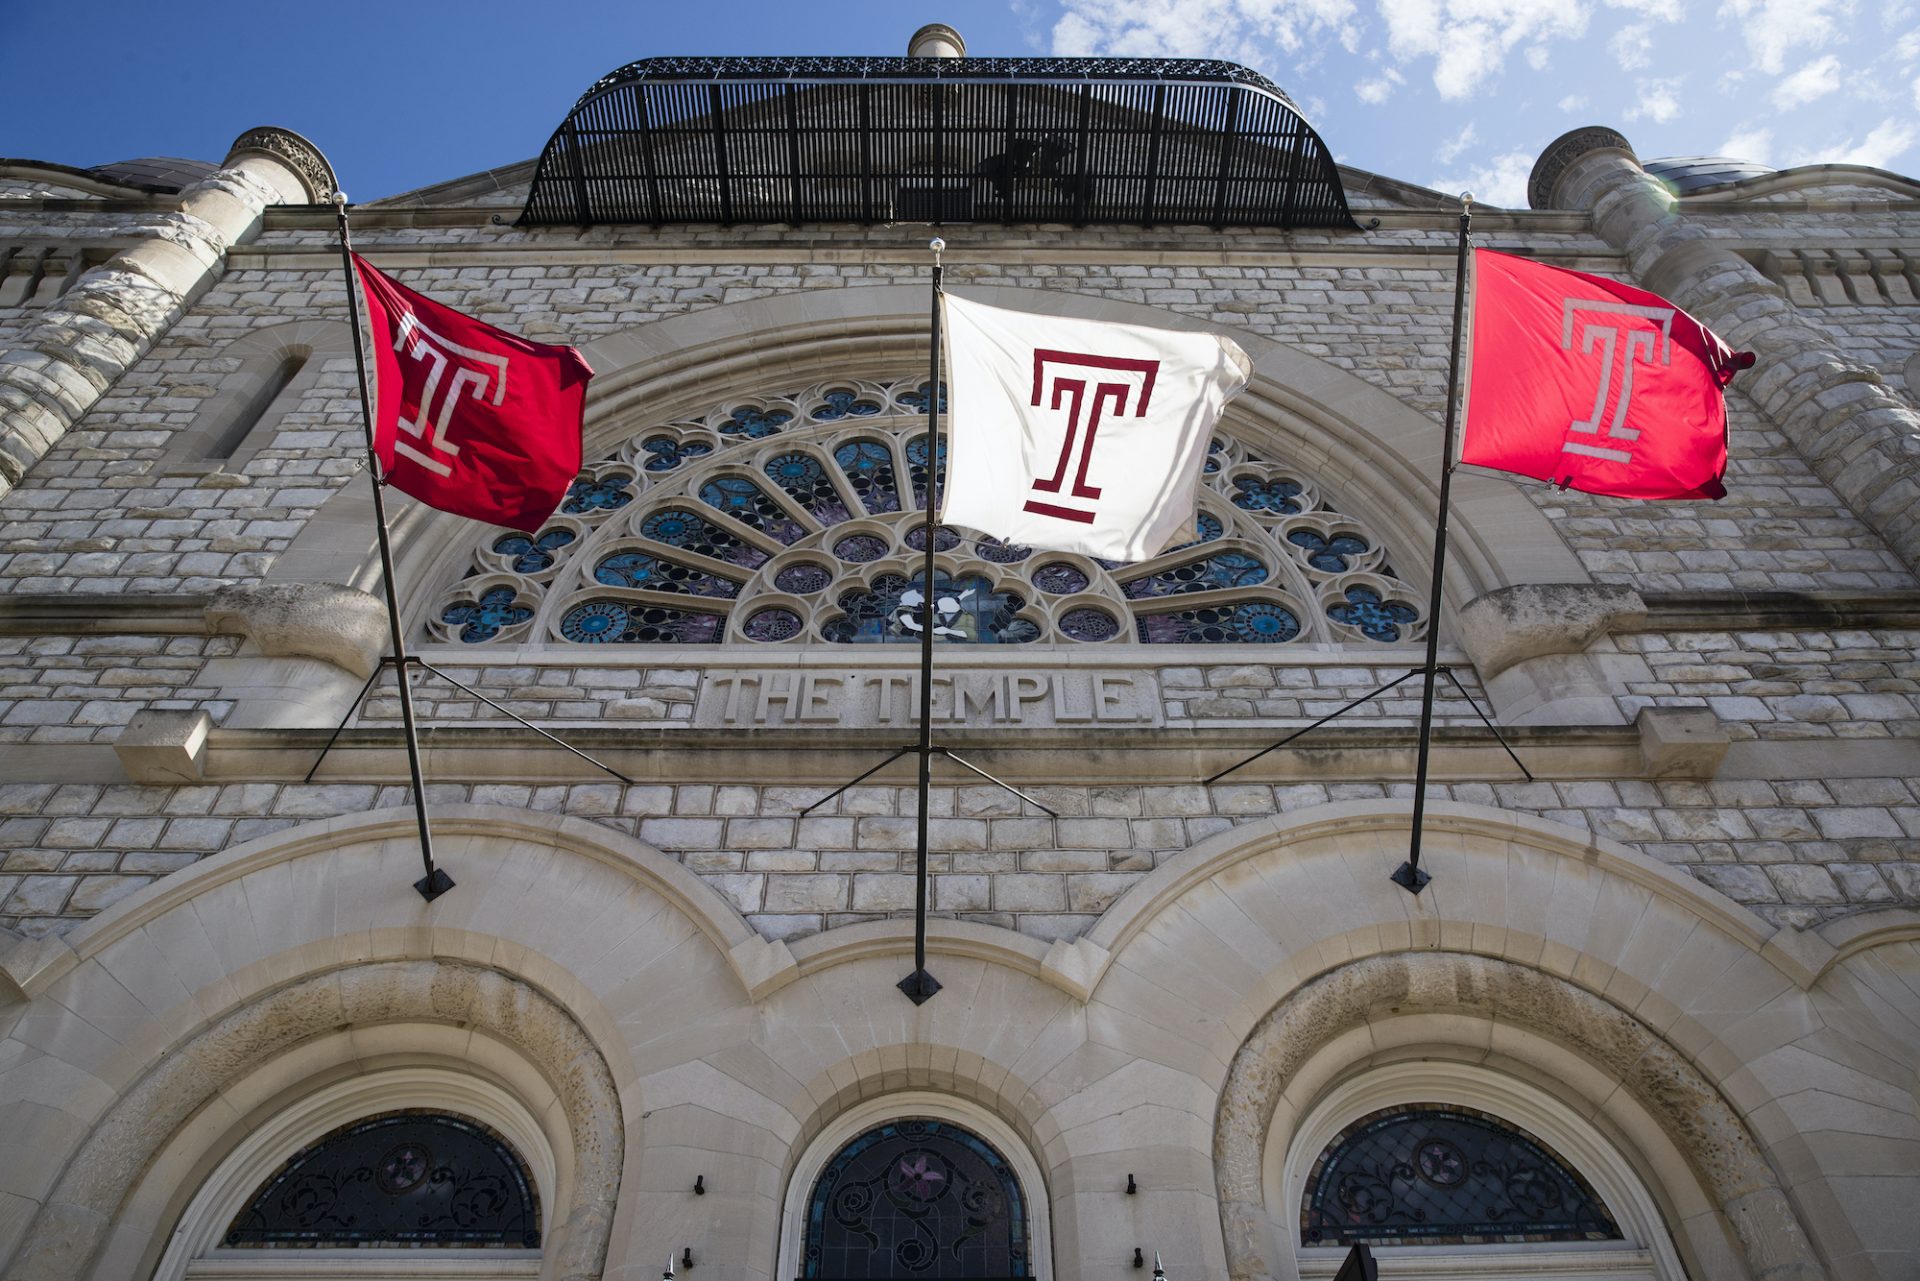 FILE PHOTO: Flags wave in the wind from a building on the at Temple University campus in Philadelphia, Tuesday, Oct. 10, 2017.